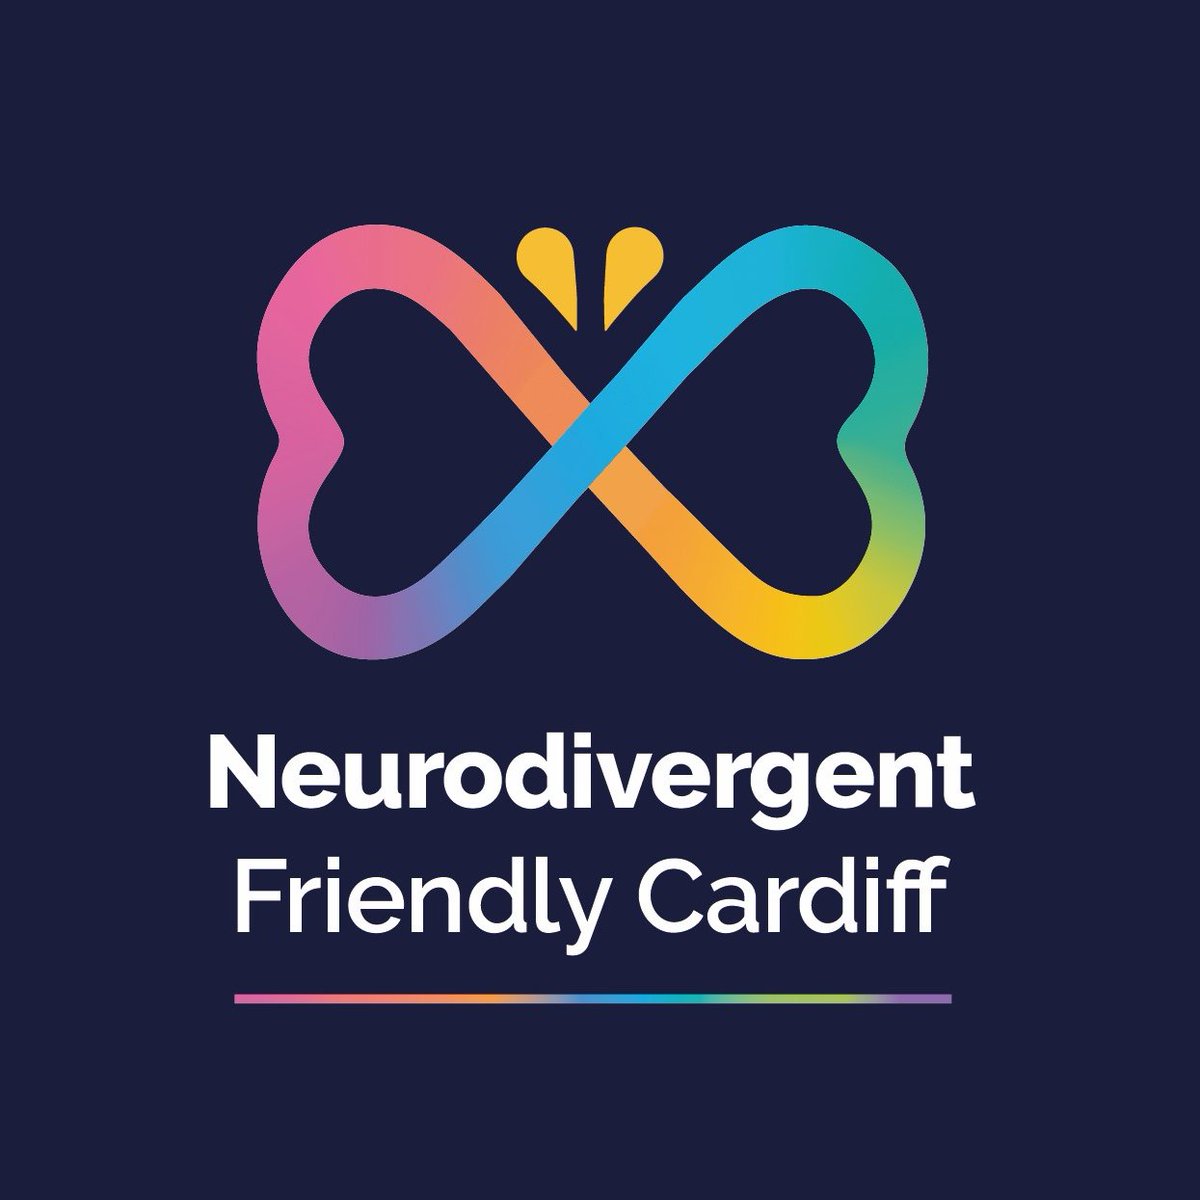 Last month, @cardiffcouncil held an event, bringing together experts, public service partners and neurodivergent individuals to develop a strategy to build a more #NeurodivergentFriendlyCardiff.

Learn more about the next steps here 👇
cardiffnewsroom.co.uk/releases/c25/3…